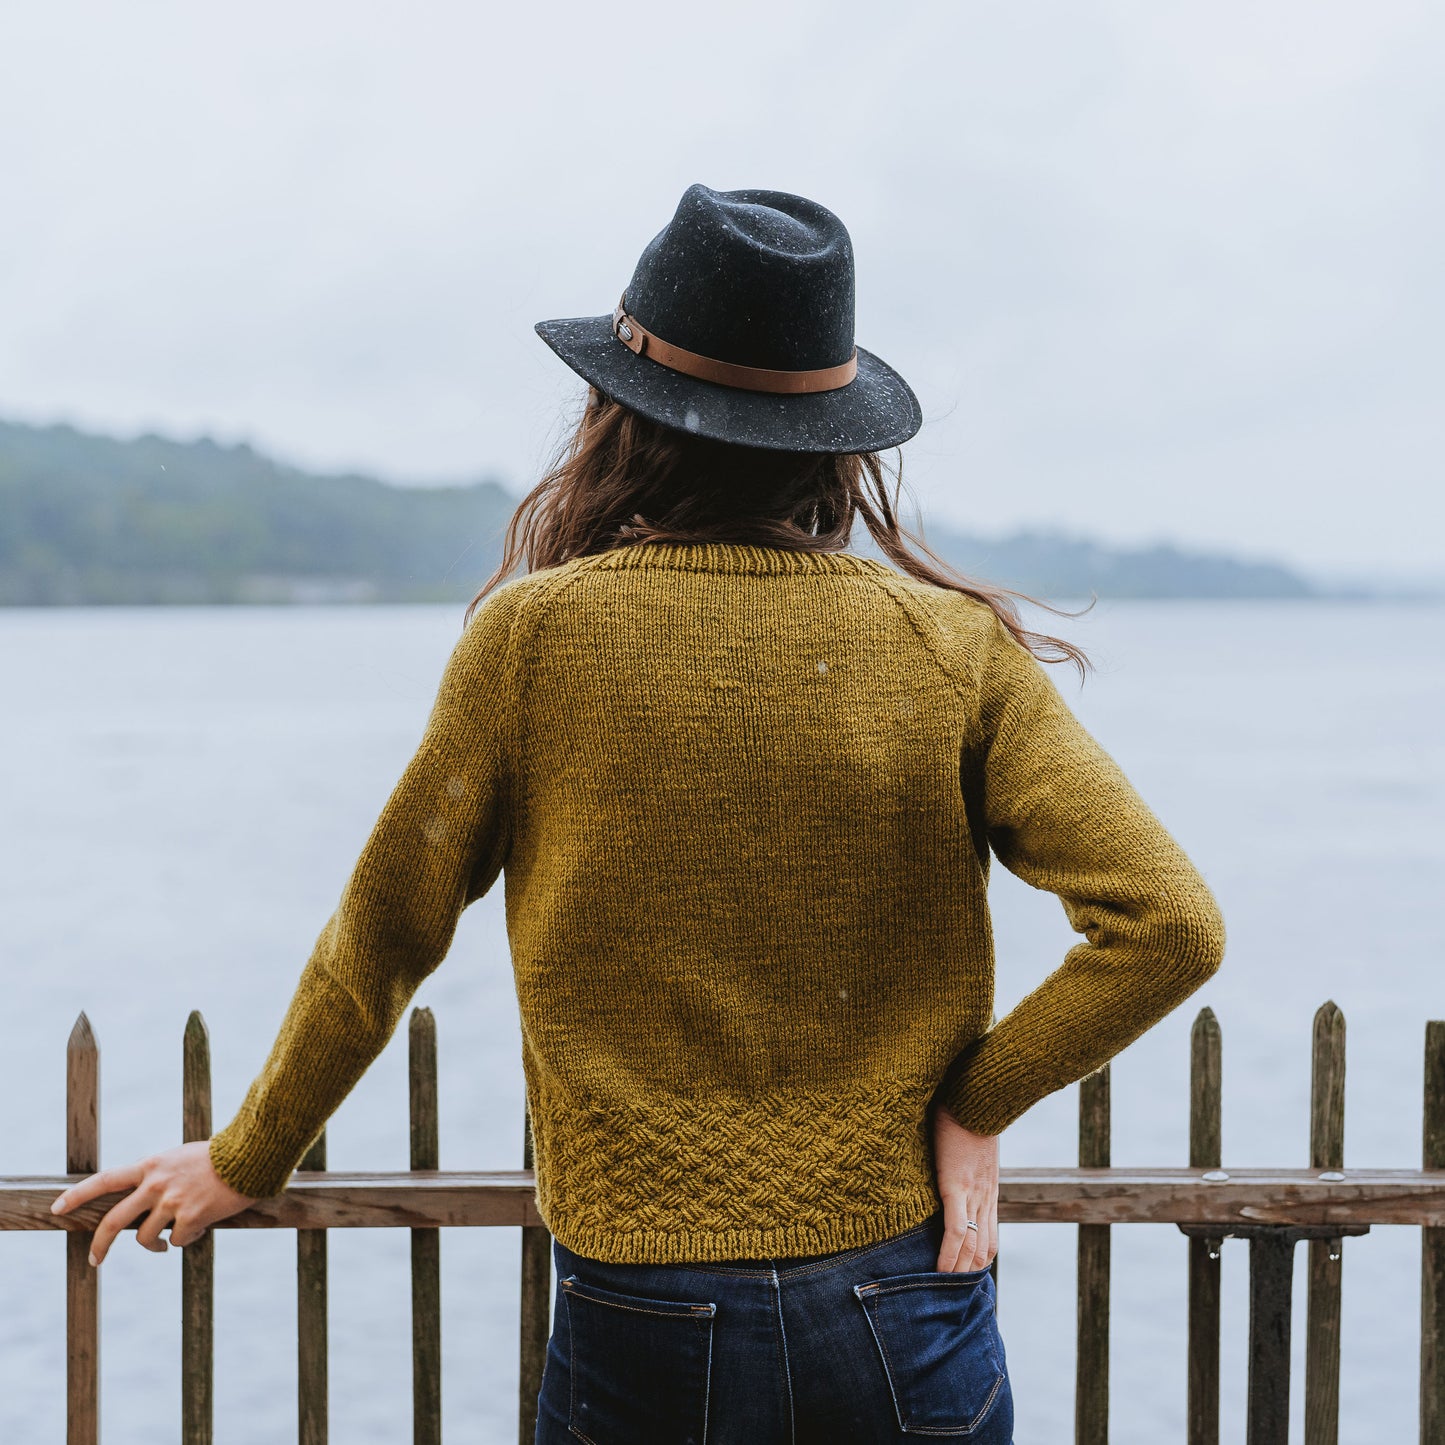 Seen from behind, Laura stands in front of a body of water. The camera focuses on the details of her knit sweater, showing off the cable plait design around the hem. 